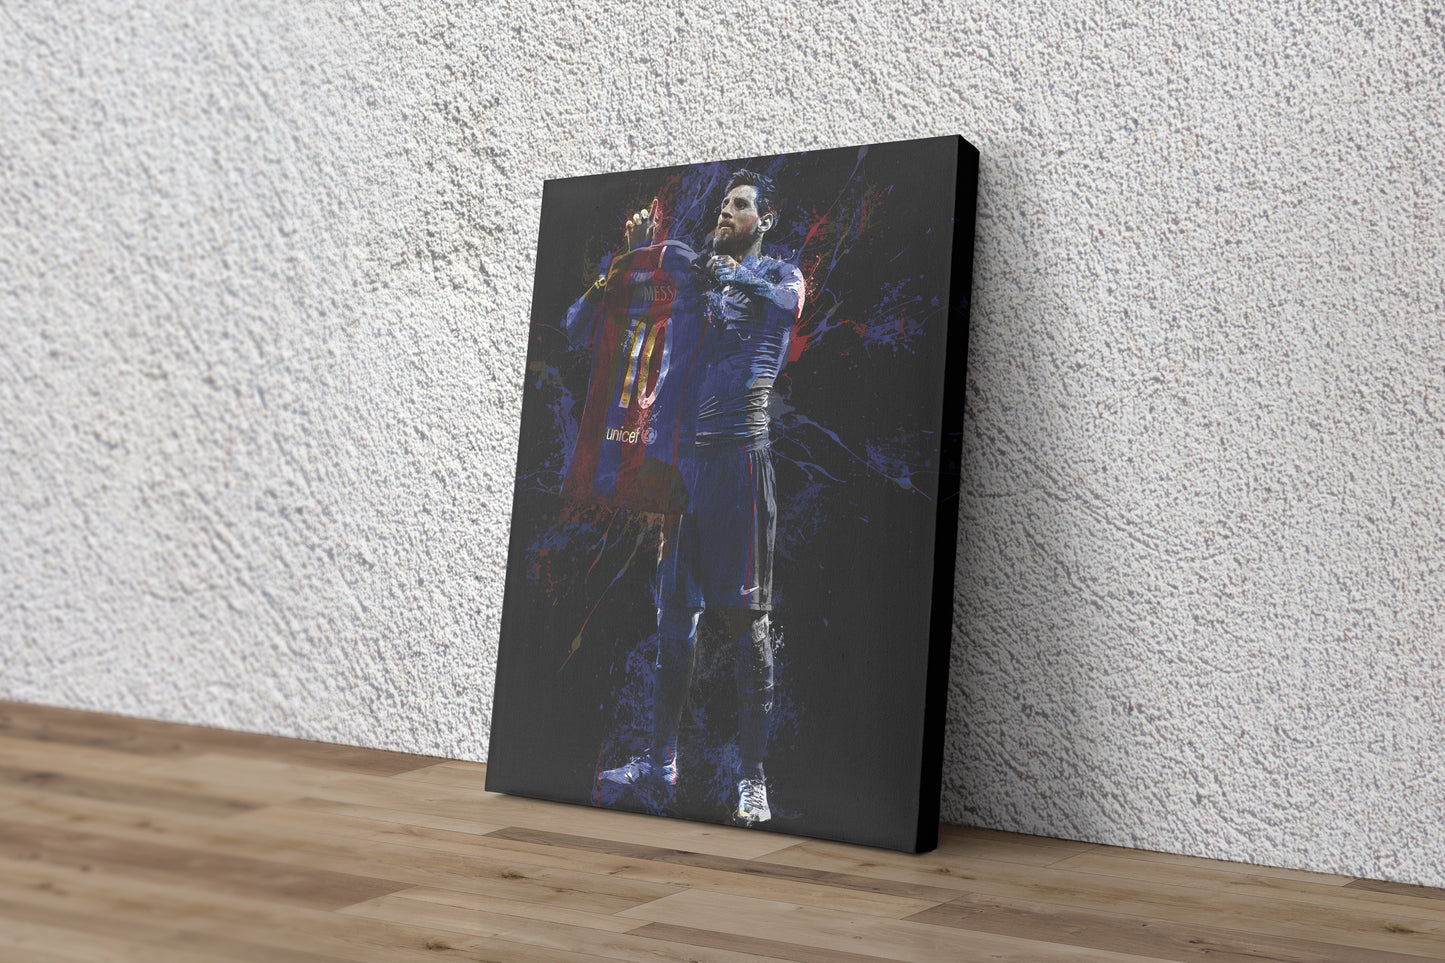 Lionel Messi Celebration Poster Soccer Player Barcelona Painting Hand Made Posters Canvas Print Kids Wall Art Man Cave Gift Home Decor